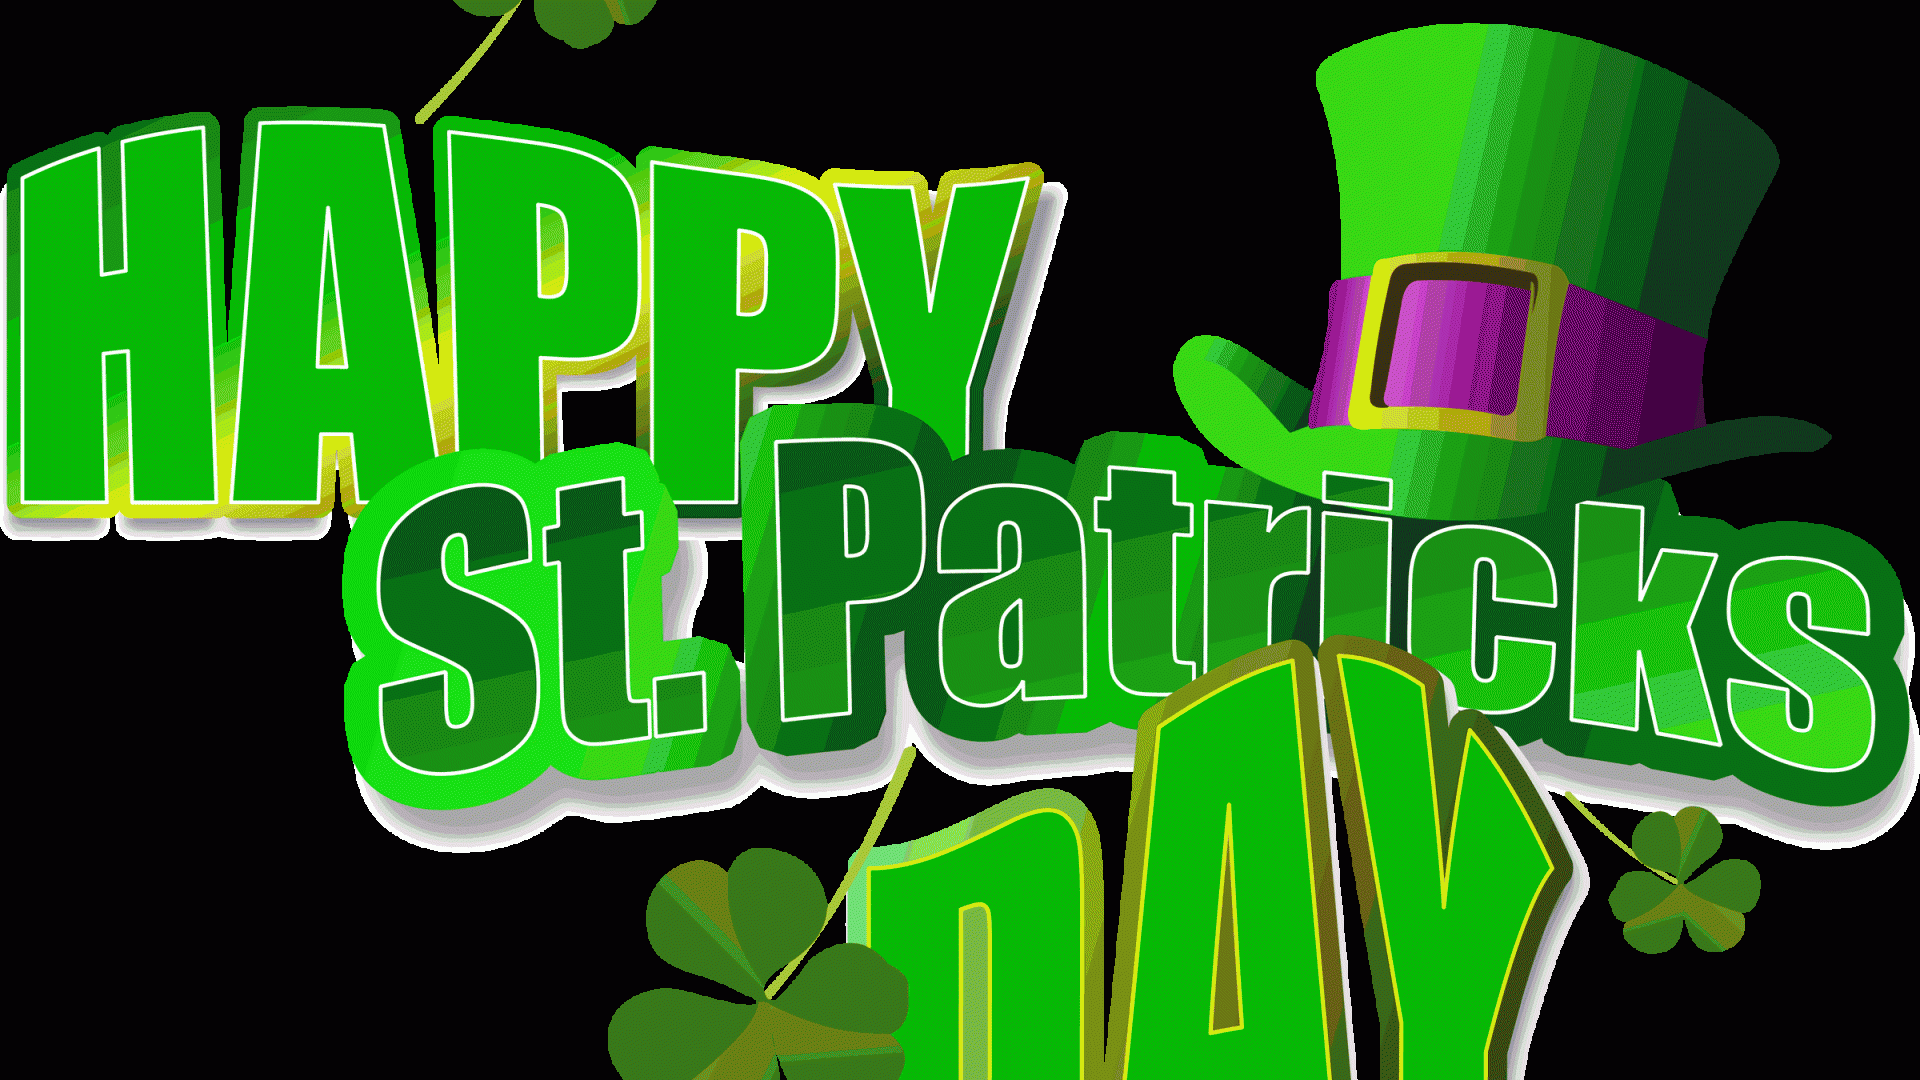 Happy St Patricks Day - High Definition, High Resolution HD Wallpapers